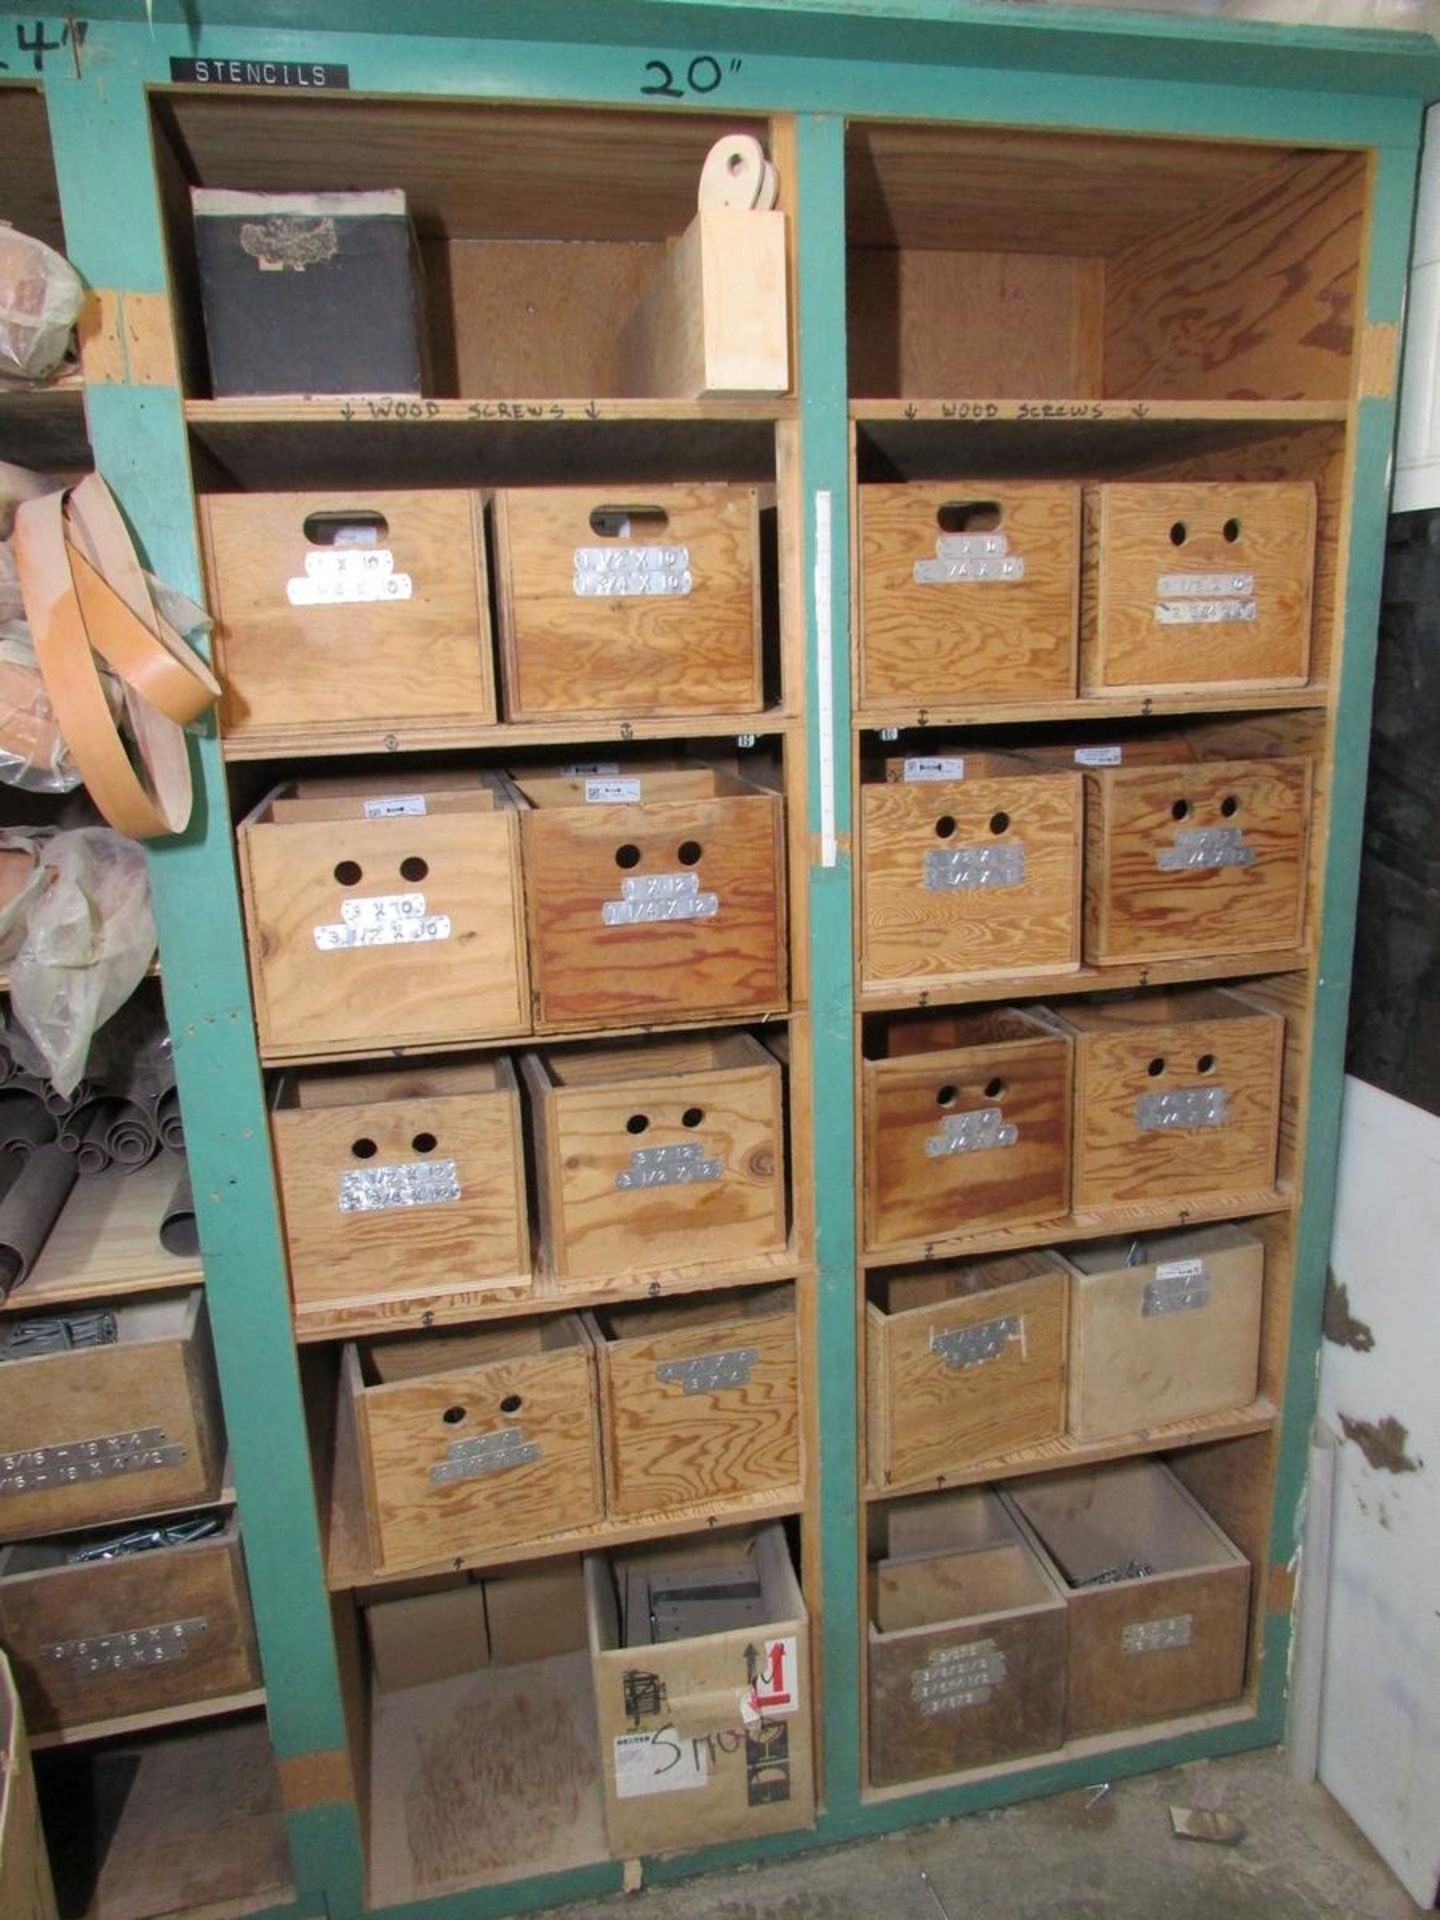 Remaining Contents of Storage Room - Image 7 of 9